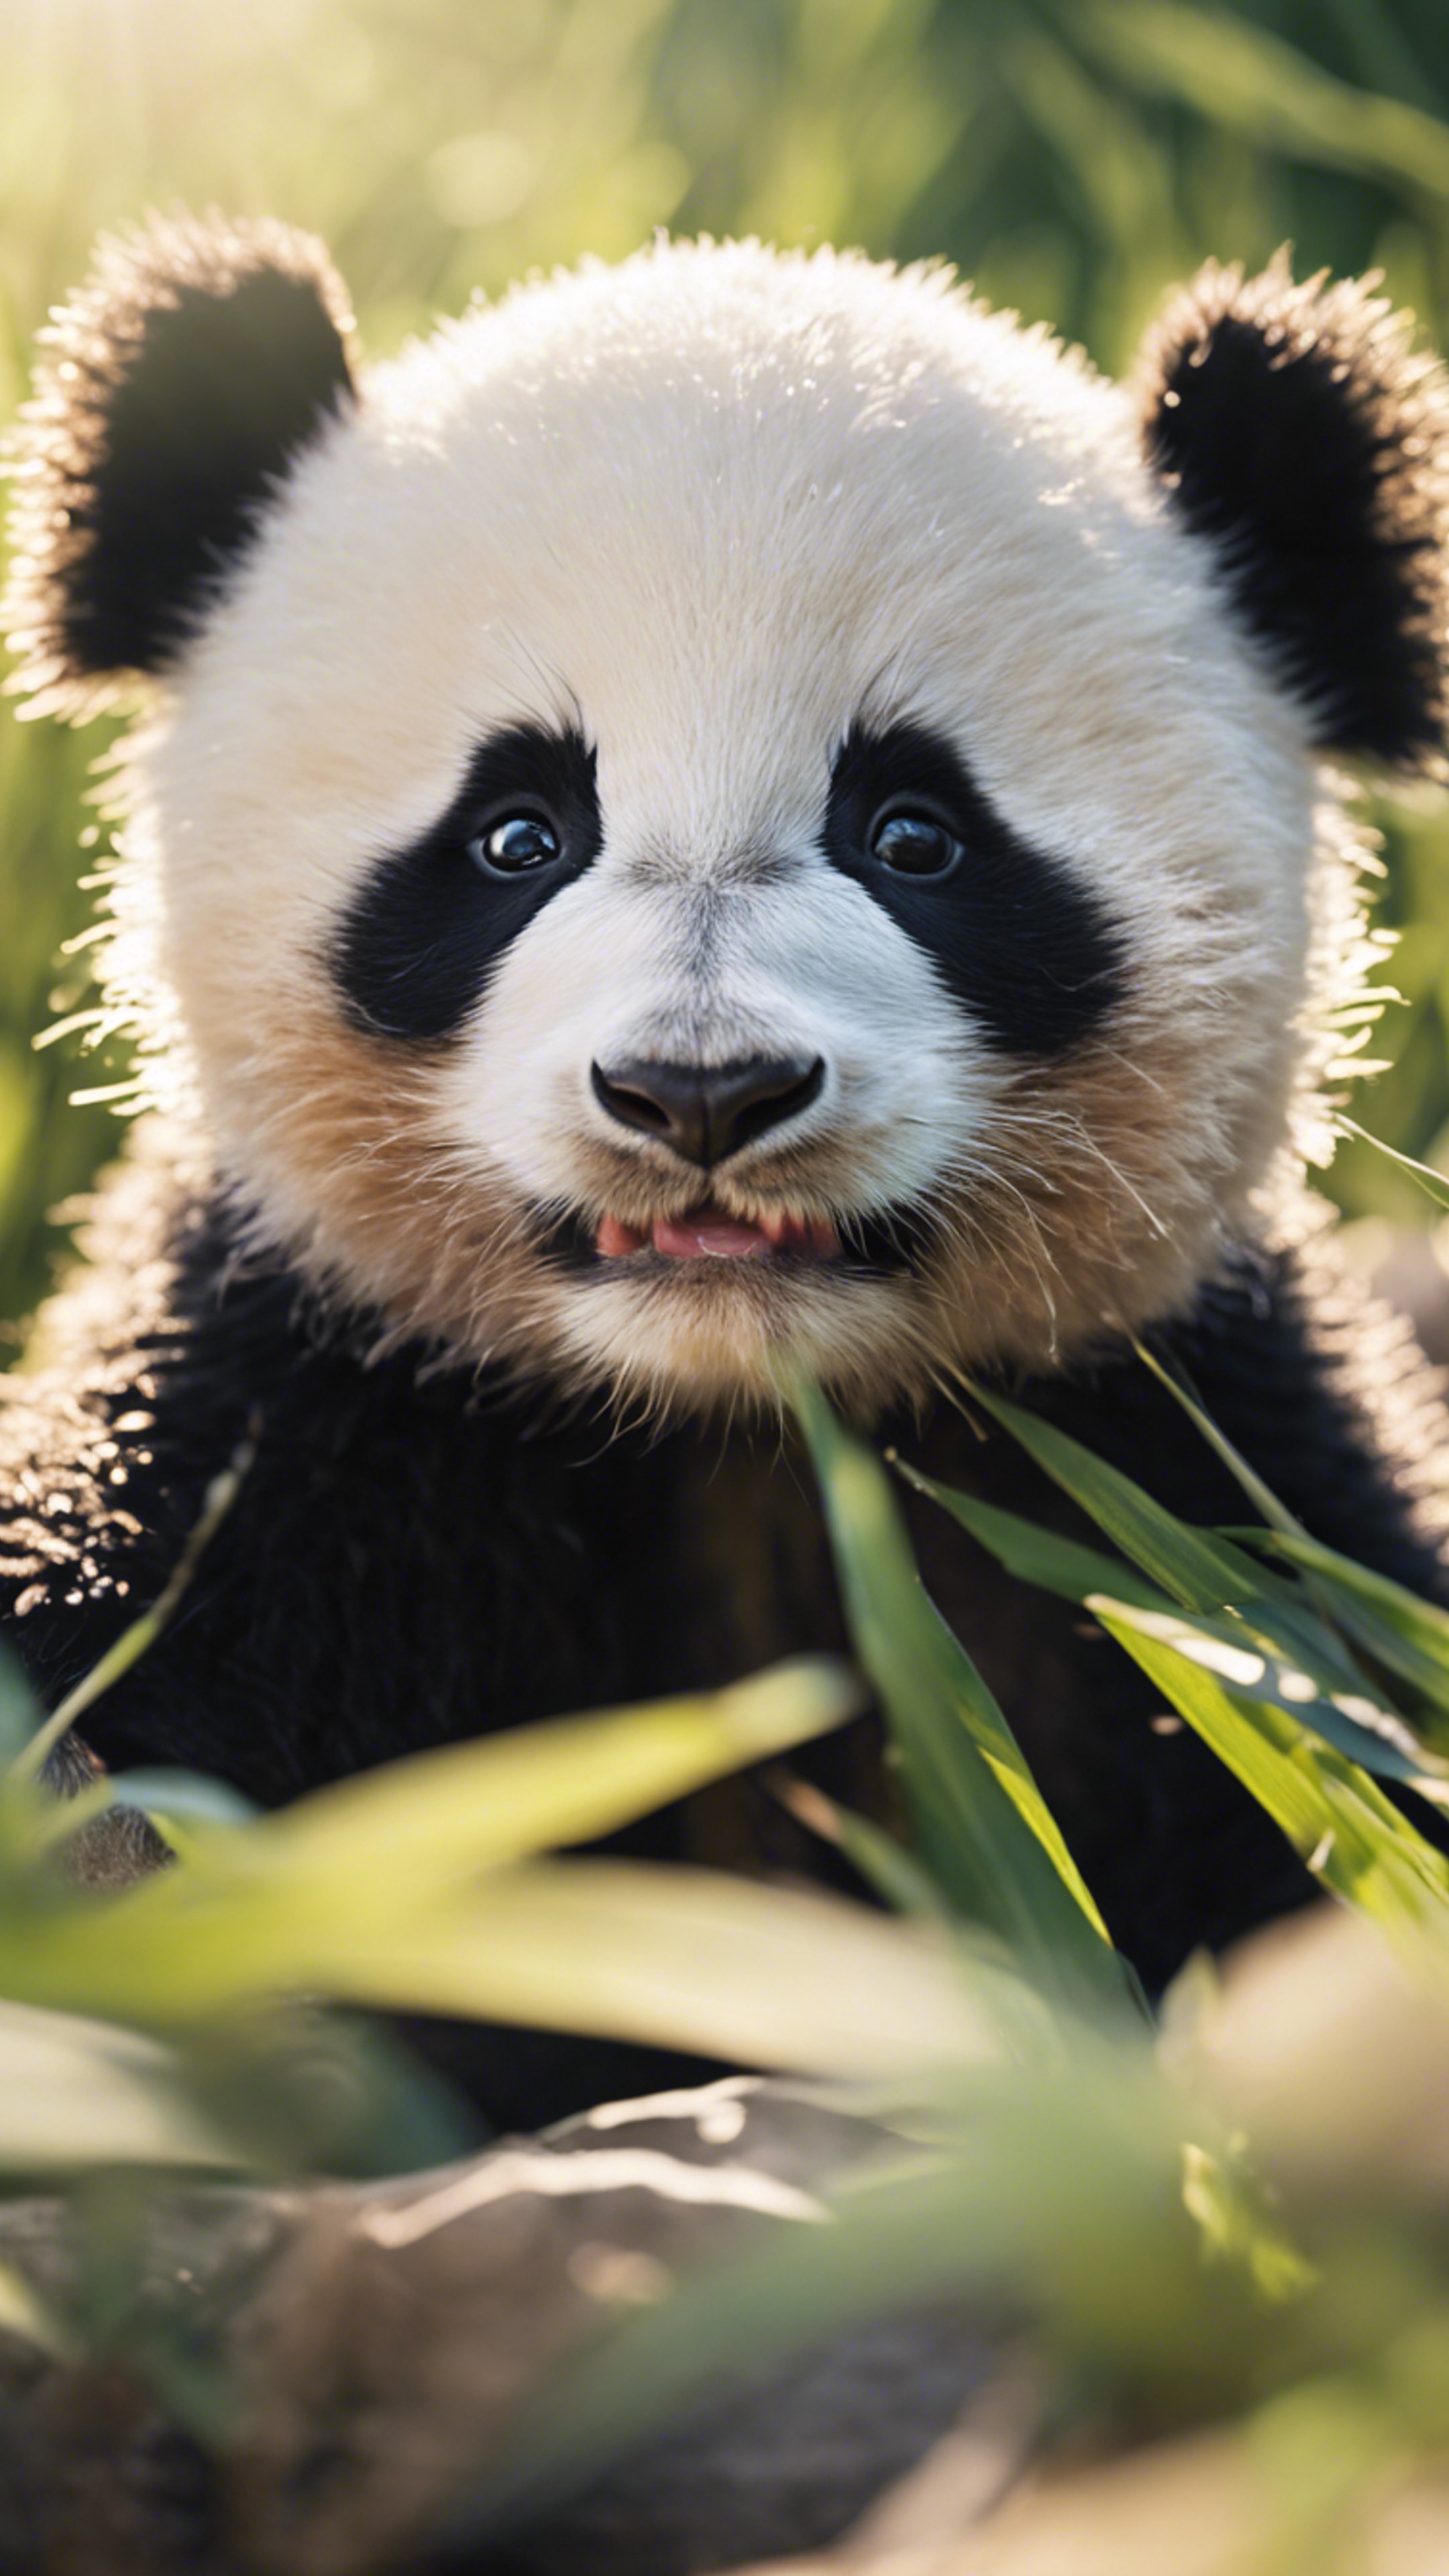 A cheeky panda cub pulling a funny face, under the warm and inviting summer sun. Tapeta[260c49d866ff4dc685e3]